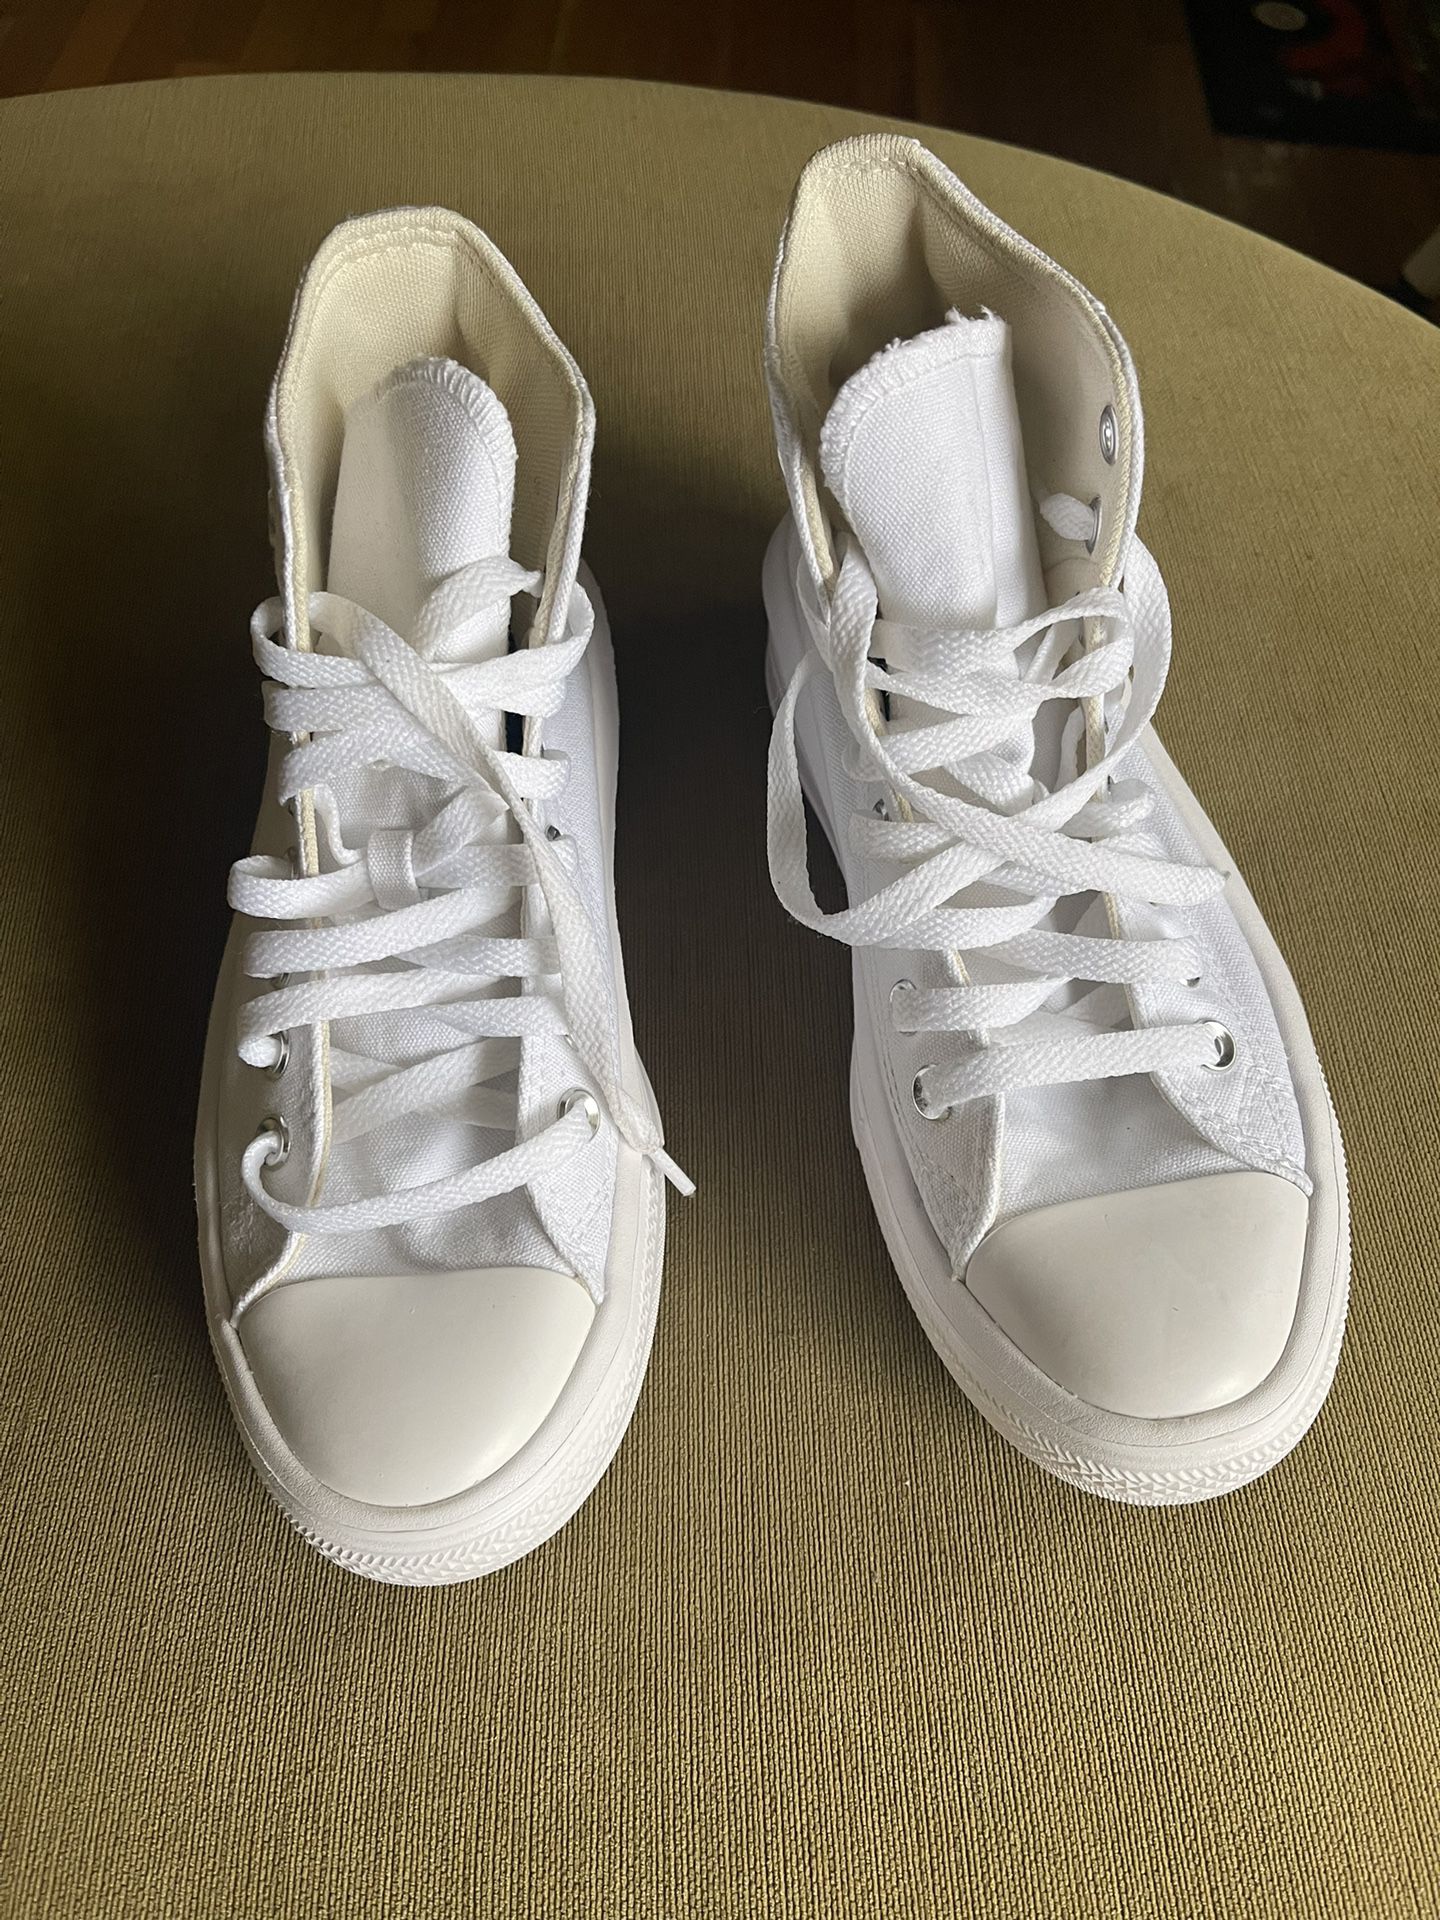 Worn Once In The House Still New Converse Move White Platform Sneakers 7